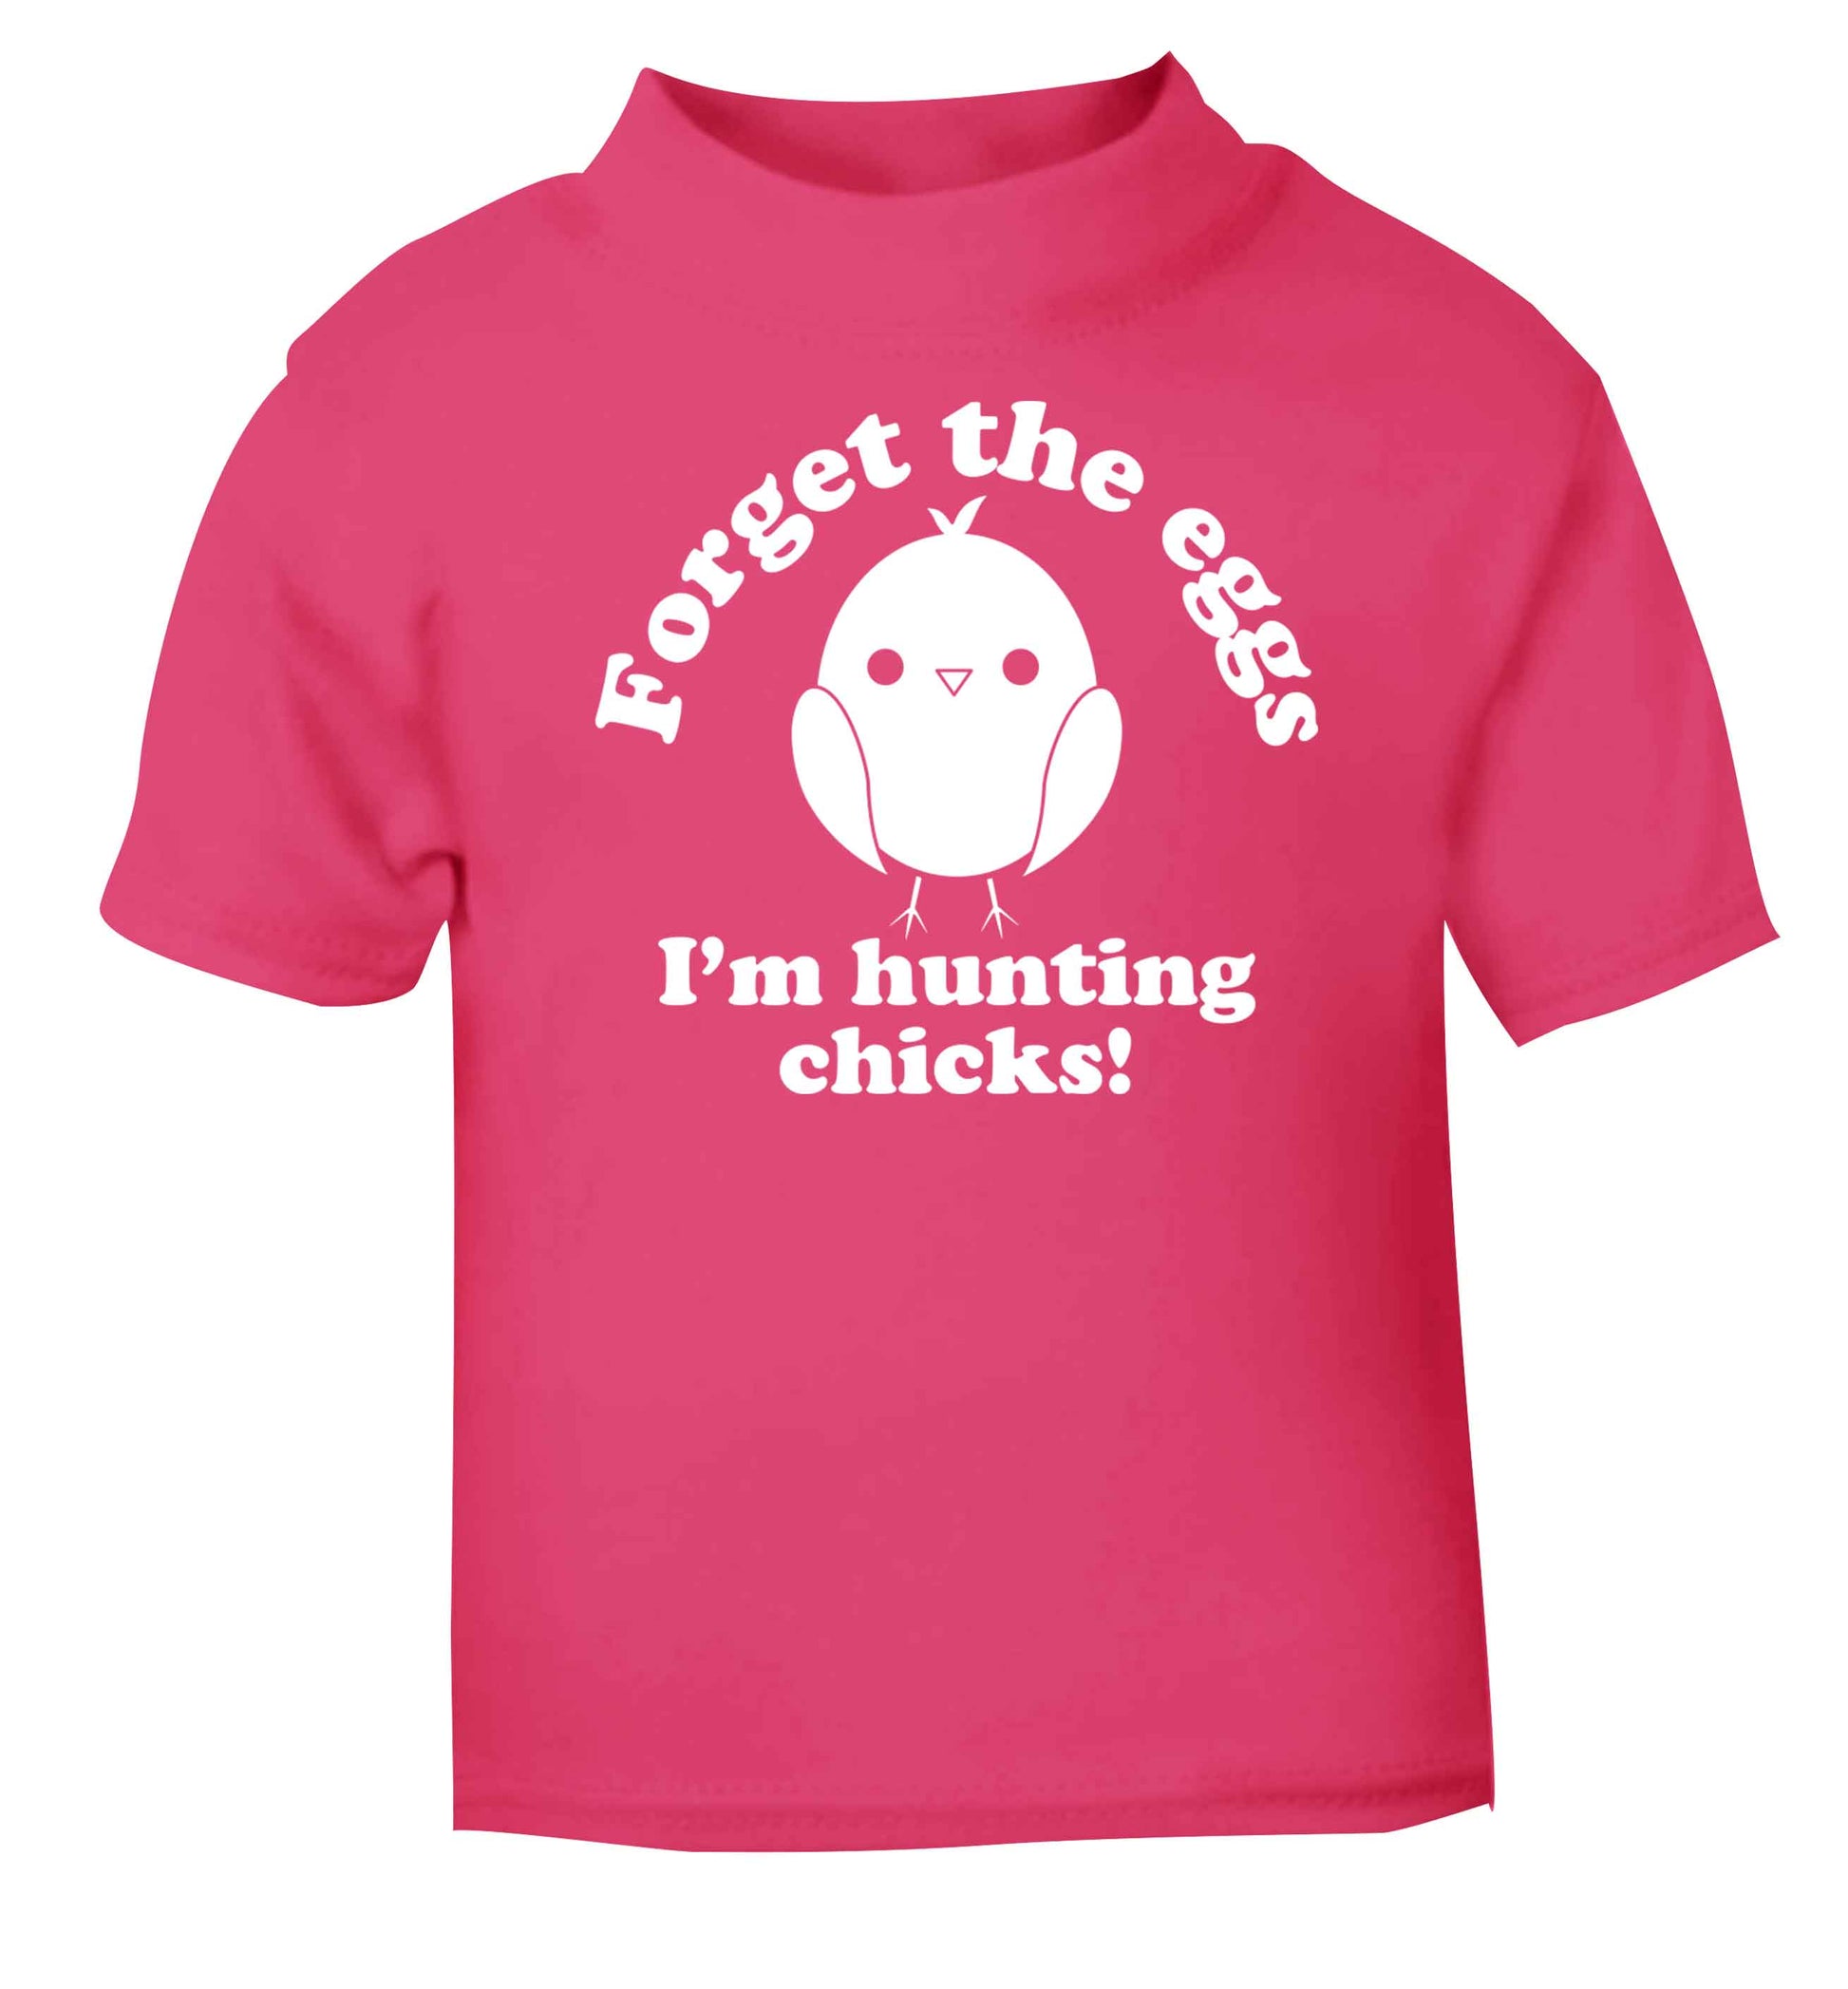 Forget the eggs I'm hunting chicks! pink baby toddler Tshirt 2 Years